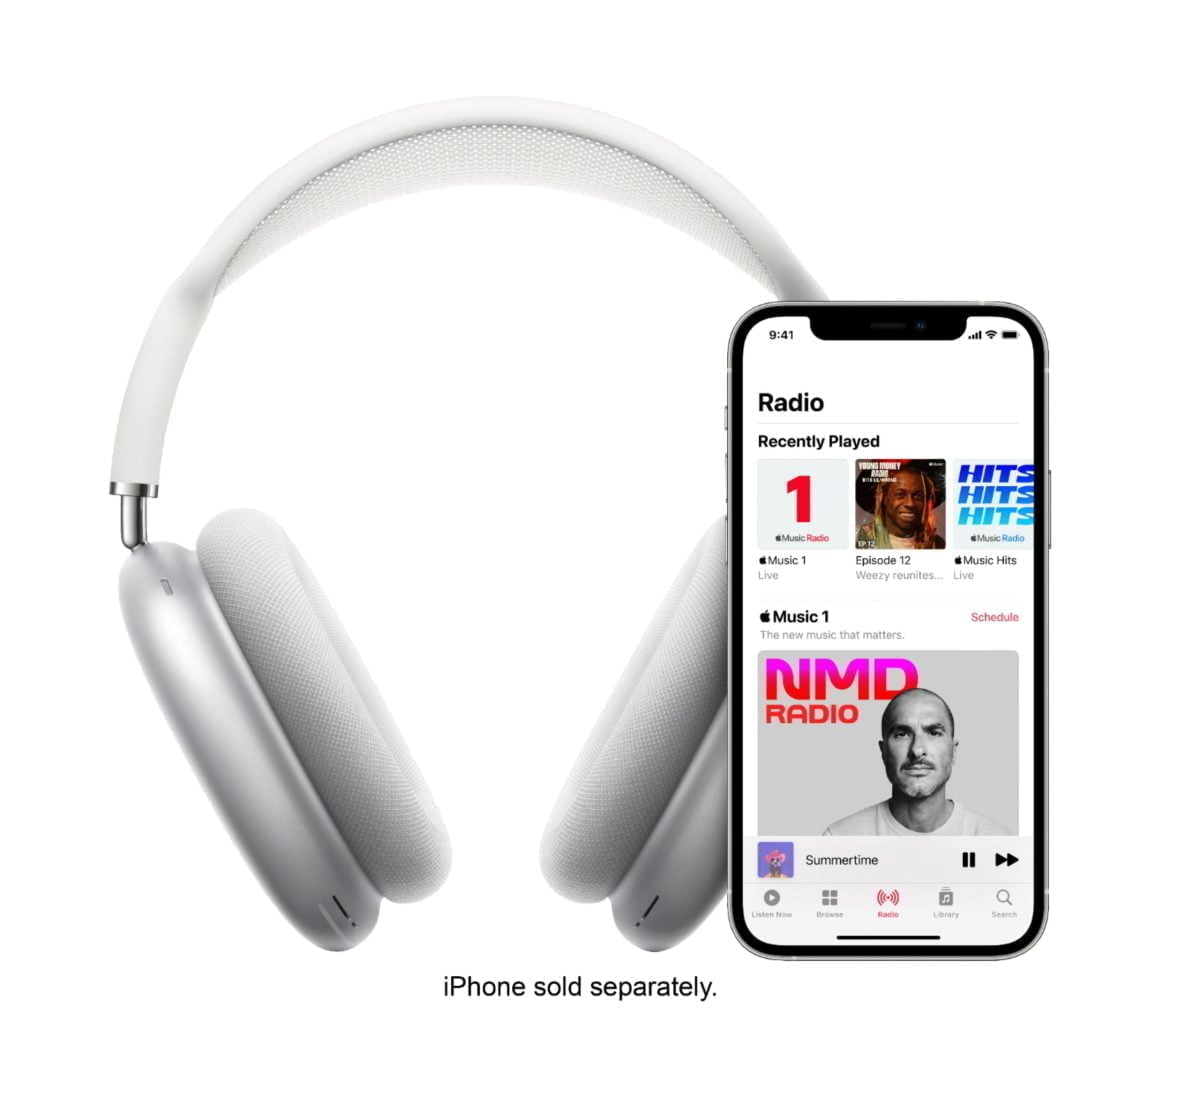 6373460Cv13D Scaled Apple &Lt;H1&Gt;Apple Airpods Max - Space Gray&Lt;/H1&Gt; &Lt;Div Class=&Quot;Long-Description-Container Body-Copy &Quot;&Gt; &Lt;Div Class=&Quot;Product-Description&Quot;&Gt;Airpods Max Reimagine Over-Ear Headphones. An Apple-Designed Dynamic Driver Provides Immersive High-Fidelity Audio. Every Detail, From Canopy To Cushions, Has Been Designed For An Exceptional Fit. Active Noise Cancellation Blocks Outside Noise, While Transparency Mode Lets It In. And Spatial Audio With Dynamic Head Tracking Provides Theater-Like Sound That Surrounds You.&Lt;/Div&Gt; &Lt;/Div&Gt; Airpods Max Apple Airpods Max - Space Gray